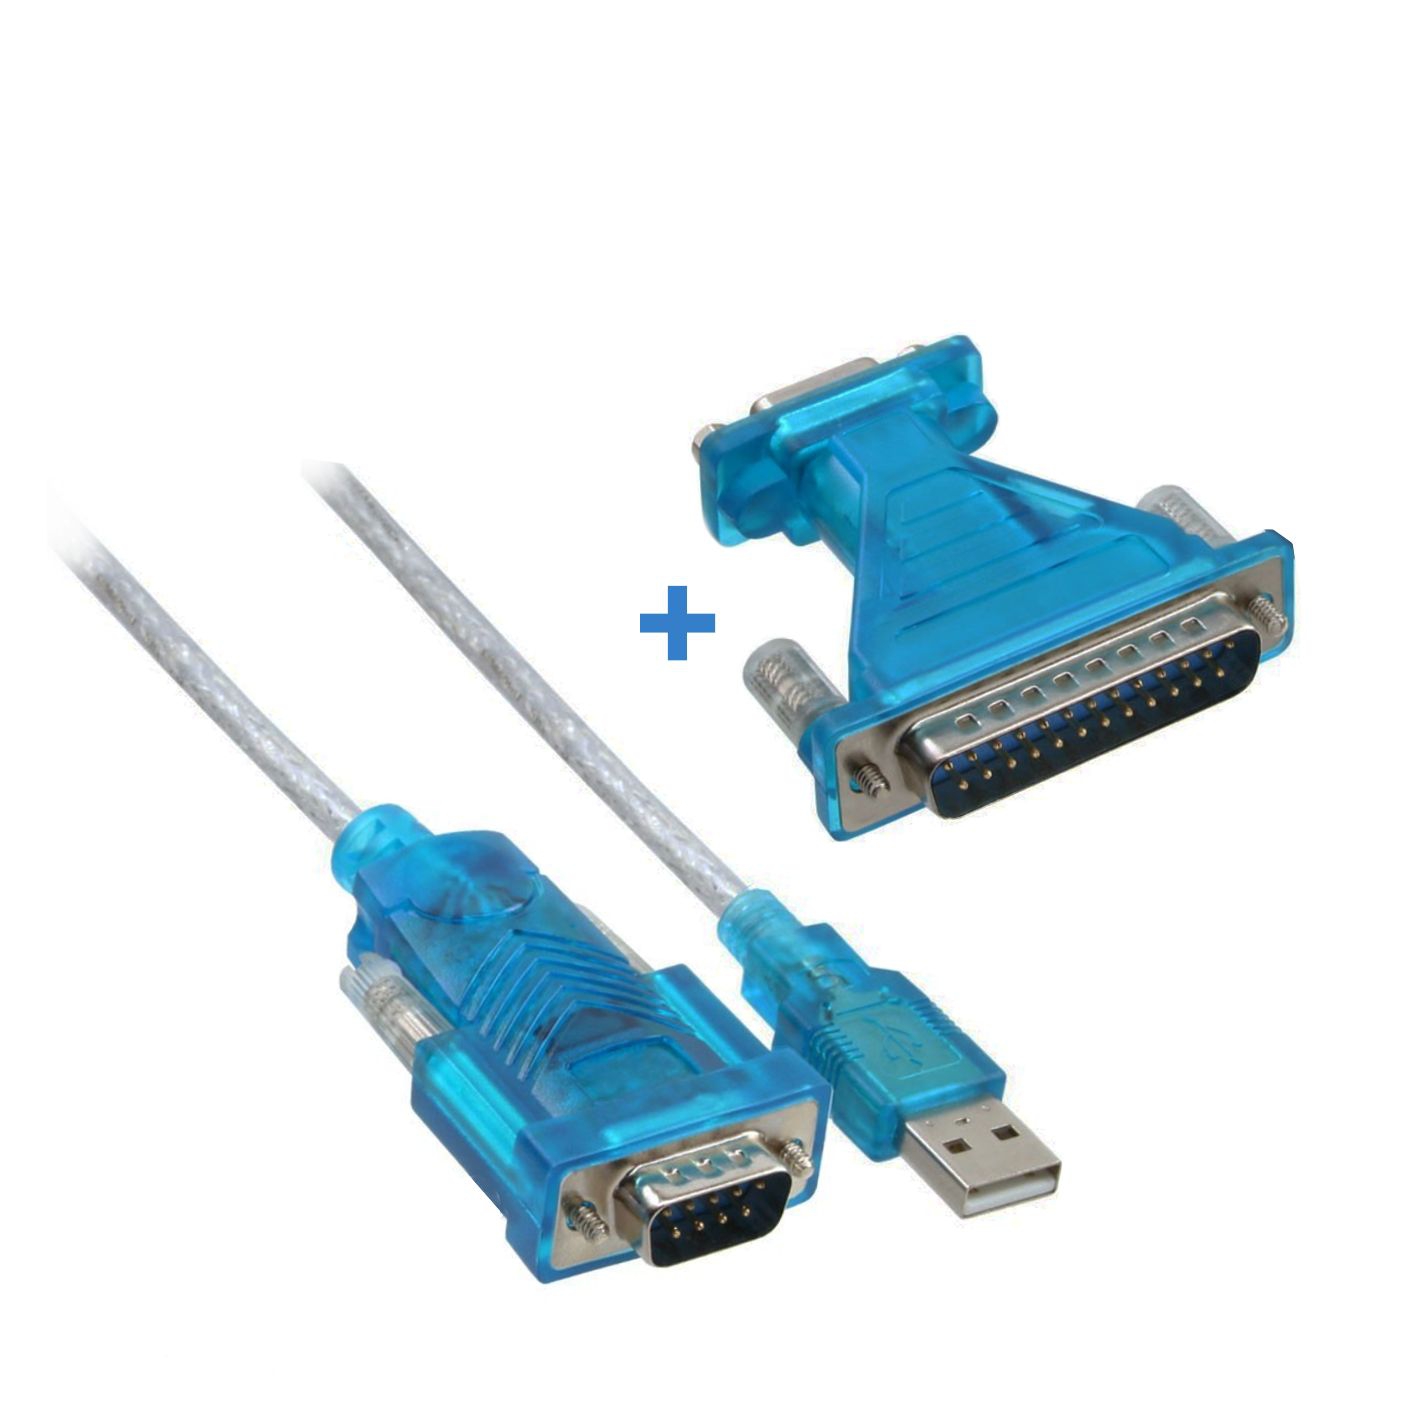 USB serial adapter cable for RS-232 with FTDI chip, USB 2.0, 180cm